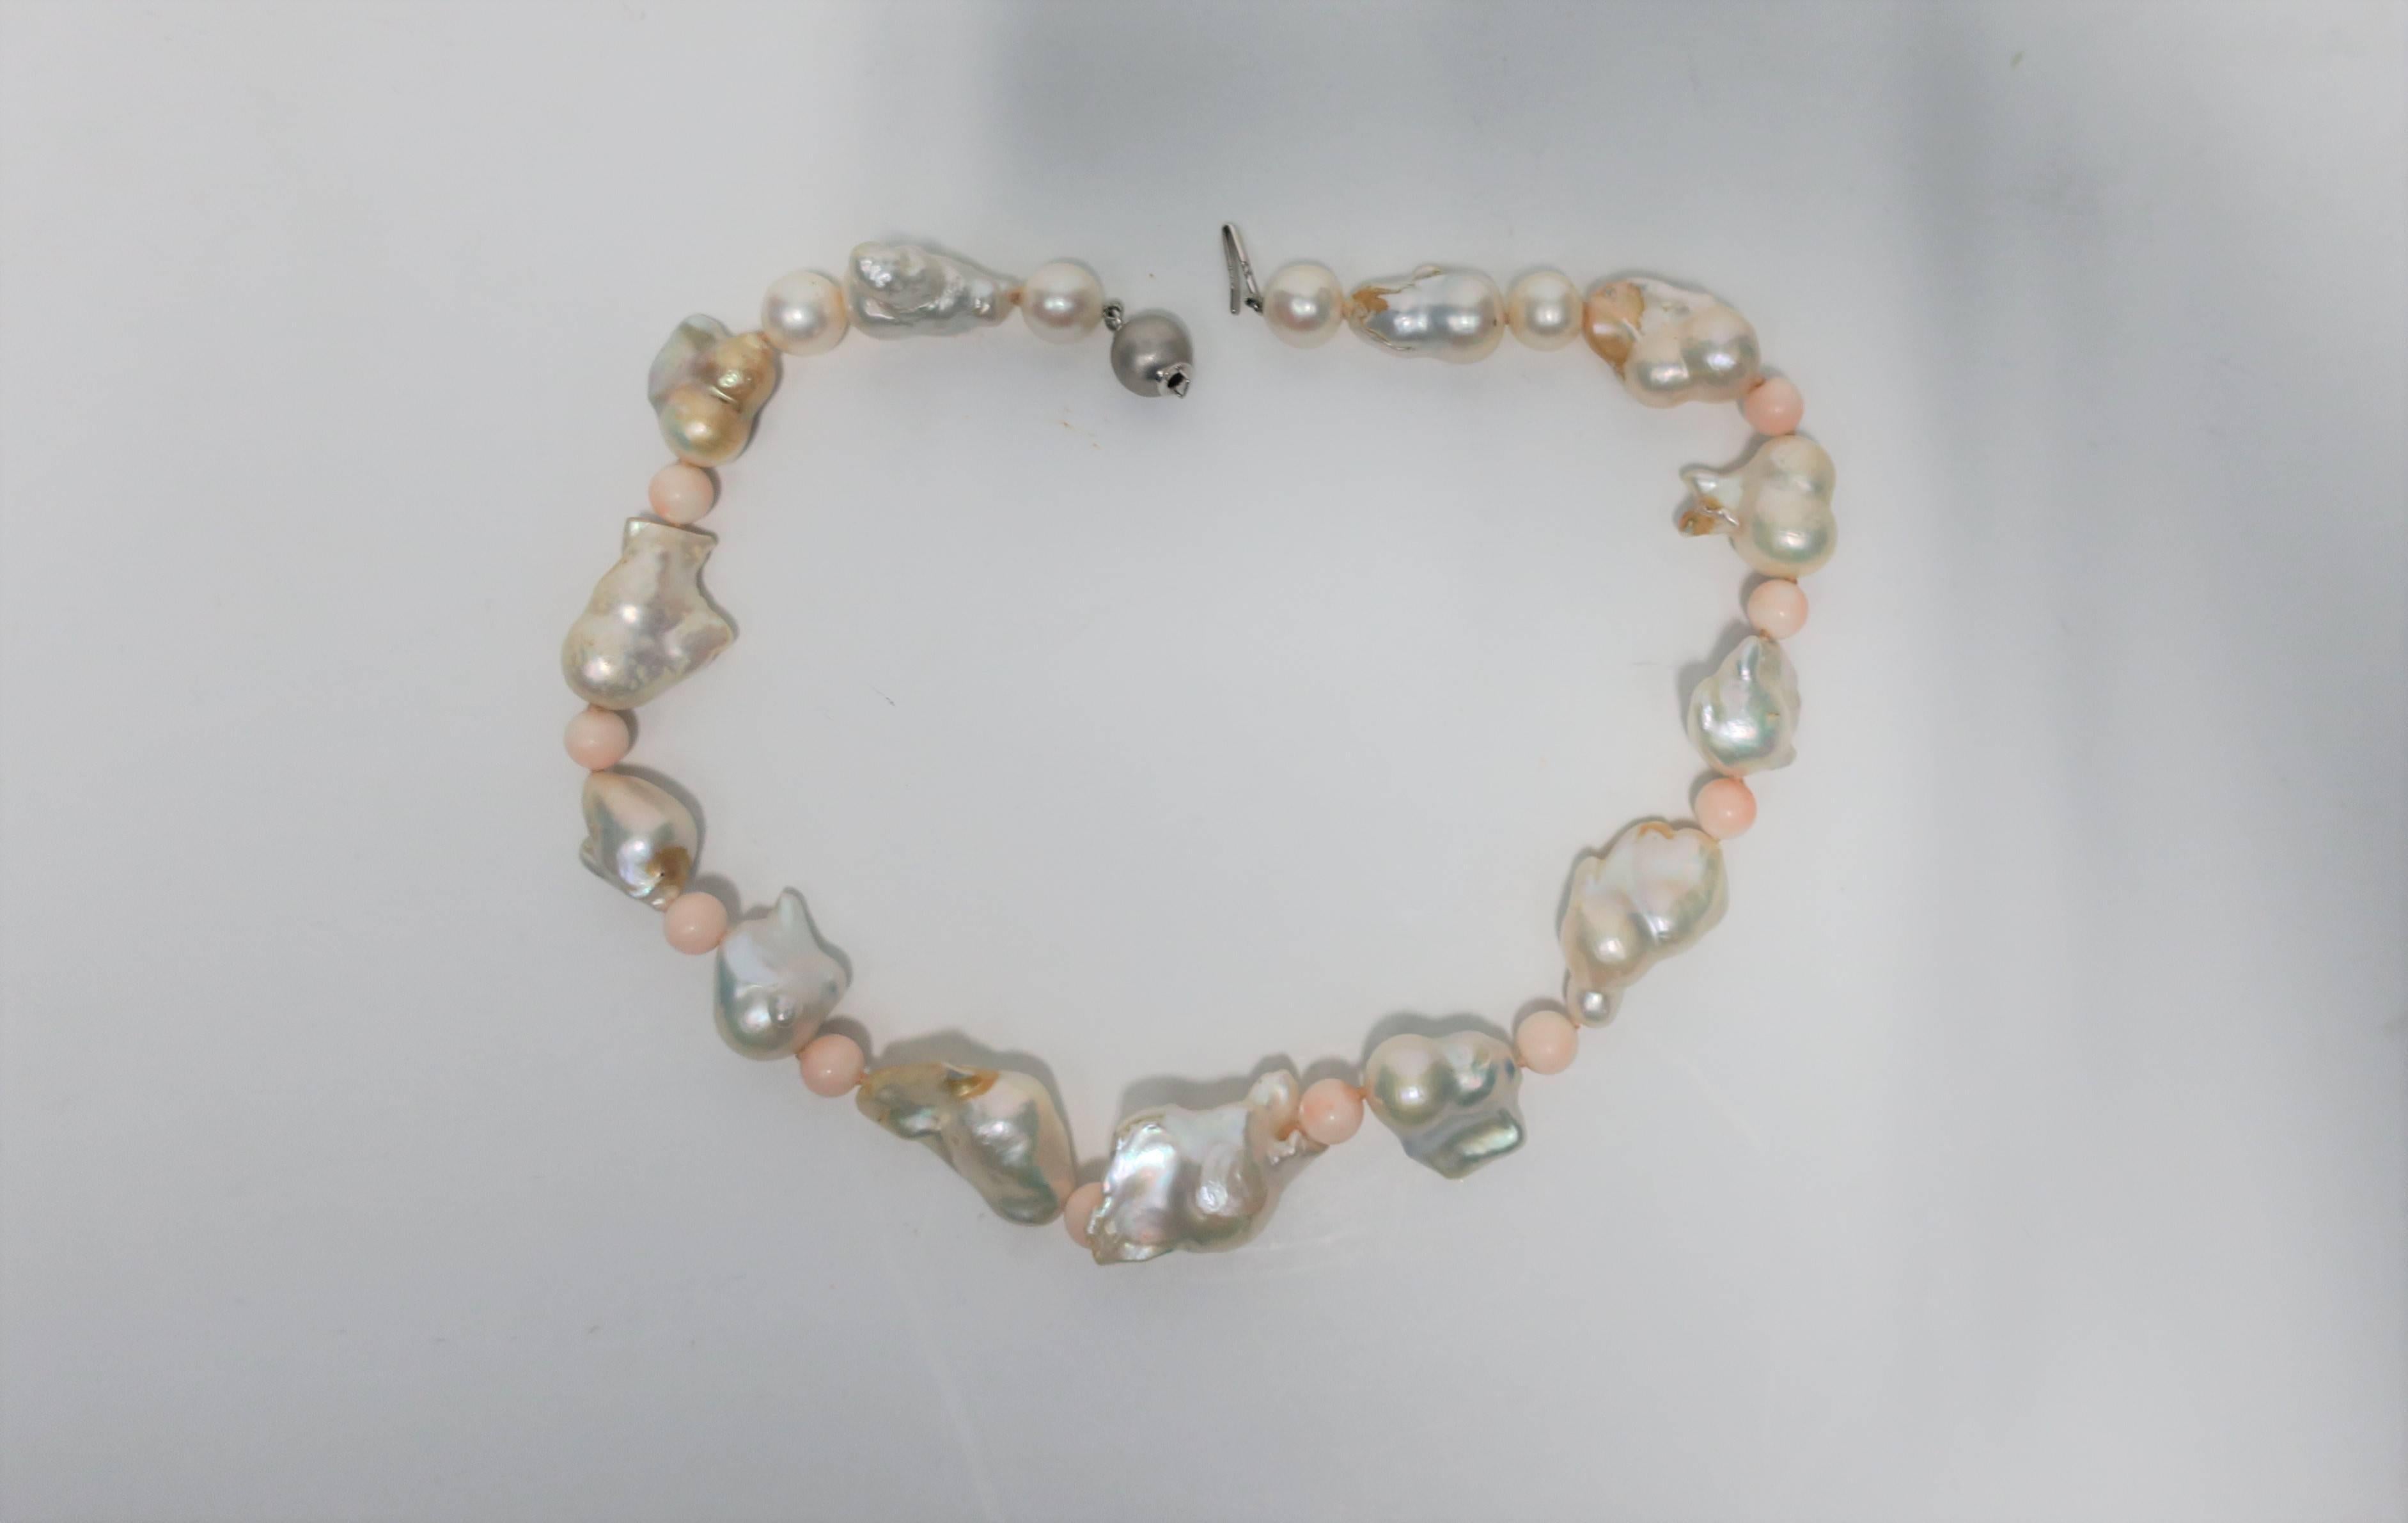 A very beautiful necklace of large baroque white freshwater pearls, light pink coral beads, cultured pearls and 18-karat white gold bead and clasp. White gold bead/clasp (looks like a grey pearl) is sandwiched by two white cultured pearls (see